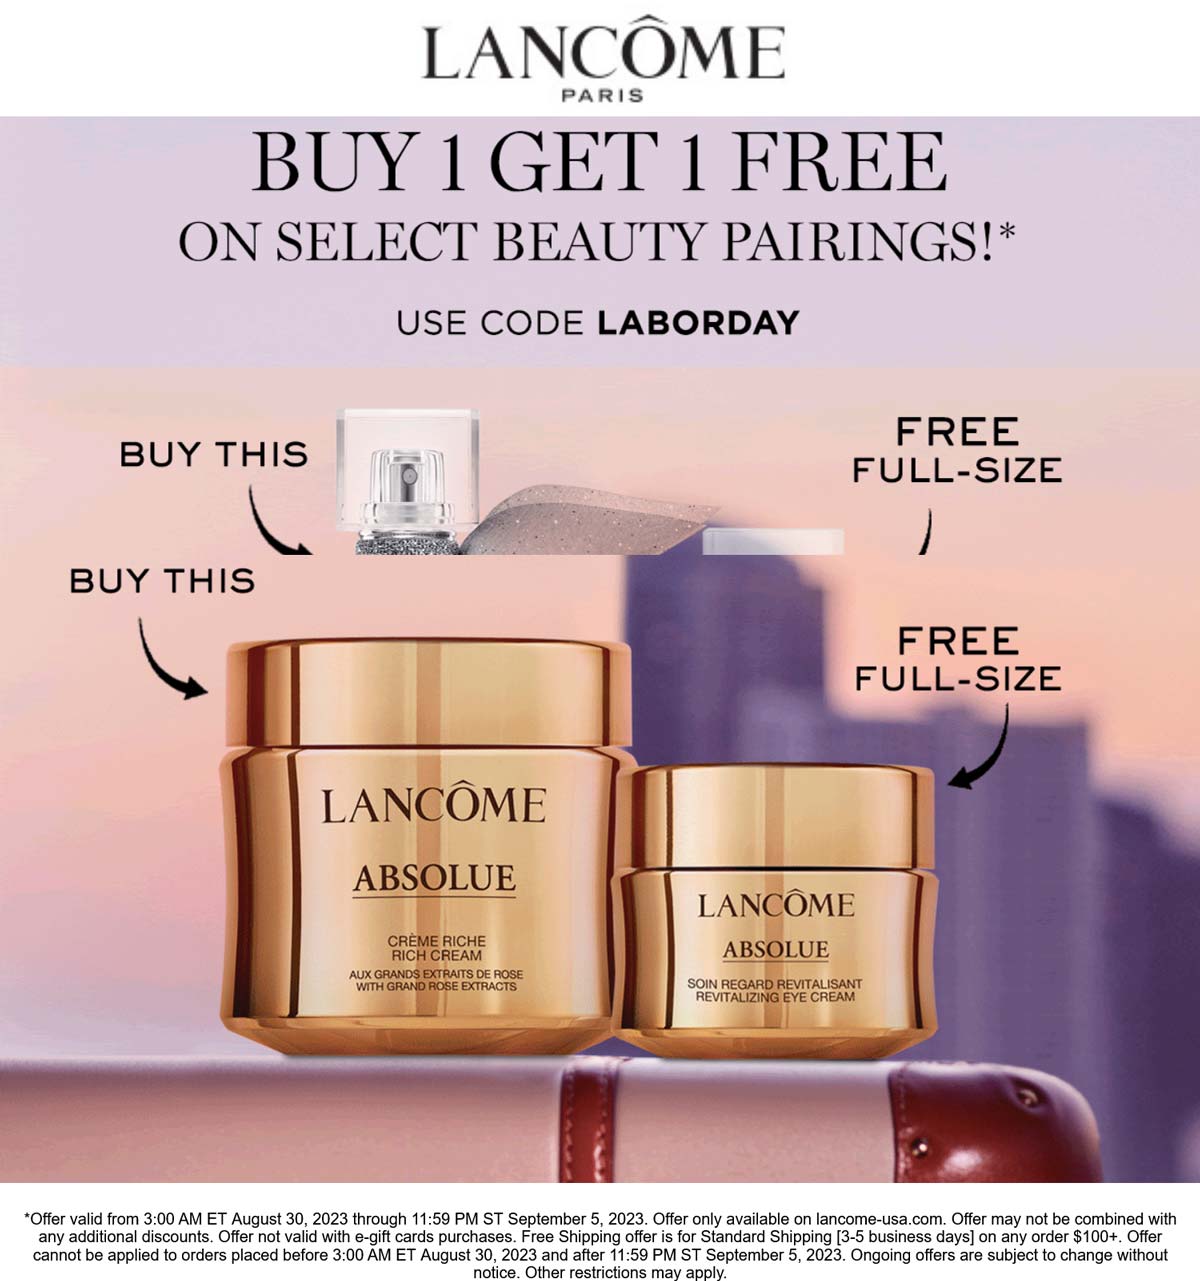 Lancome stores Coupon  Second full size item free today at Lancome via promo code LABORDAY #lancome 